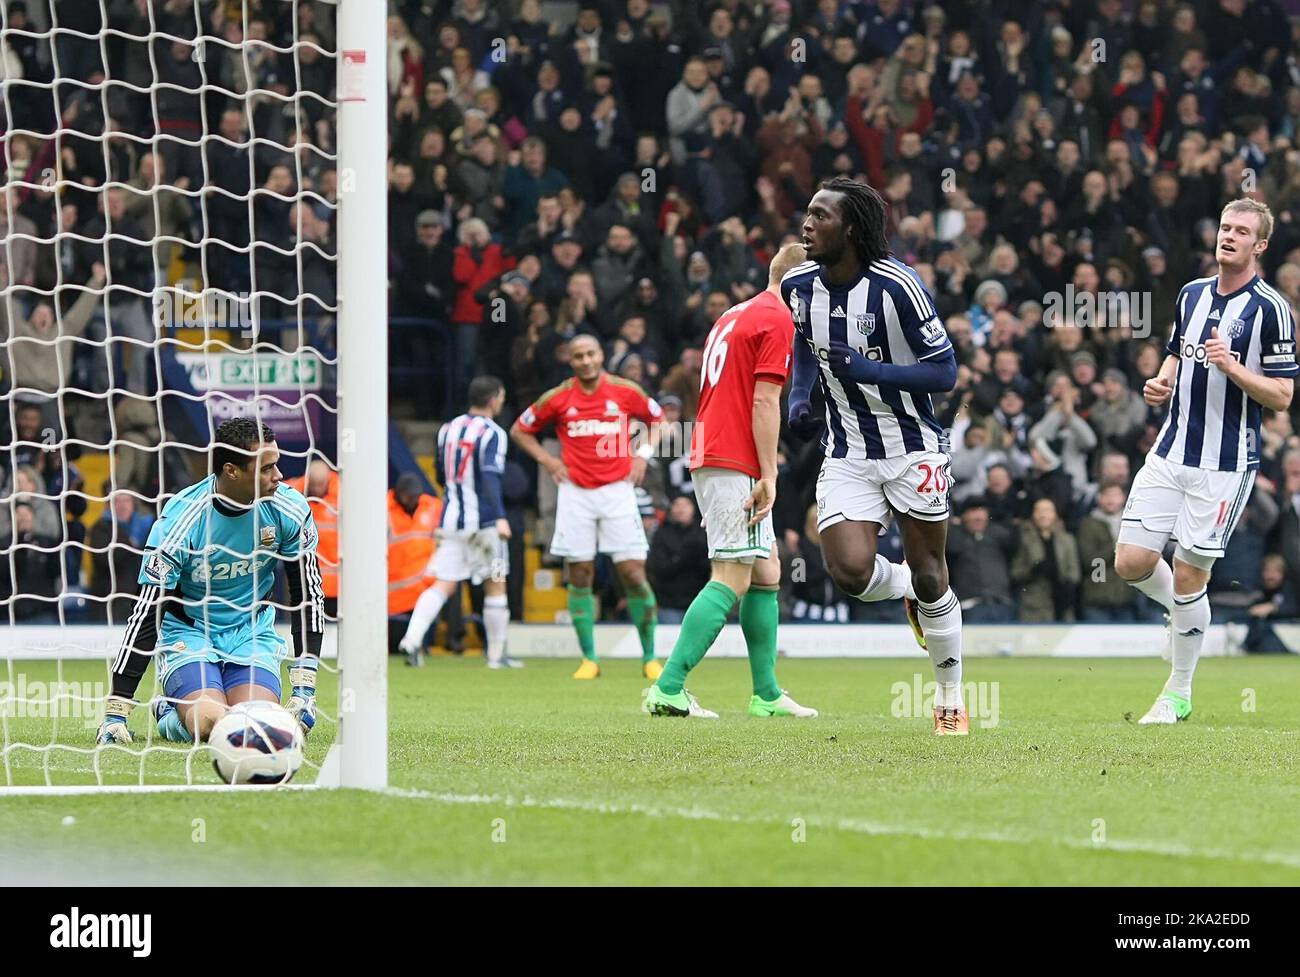 09 March 2013  - Soccer - Barclays Premiership Football - West Bromwich Albion Vs. Swansea City - Romelu Lakuku of West Bromwich Albion celebrates after equalising for WBA (1-1)  - Photo: Paul Roberts/Pathos. Stock Photo